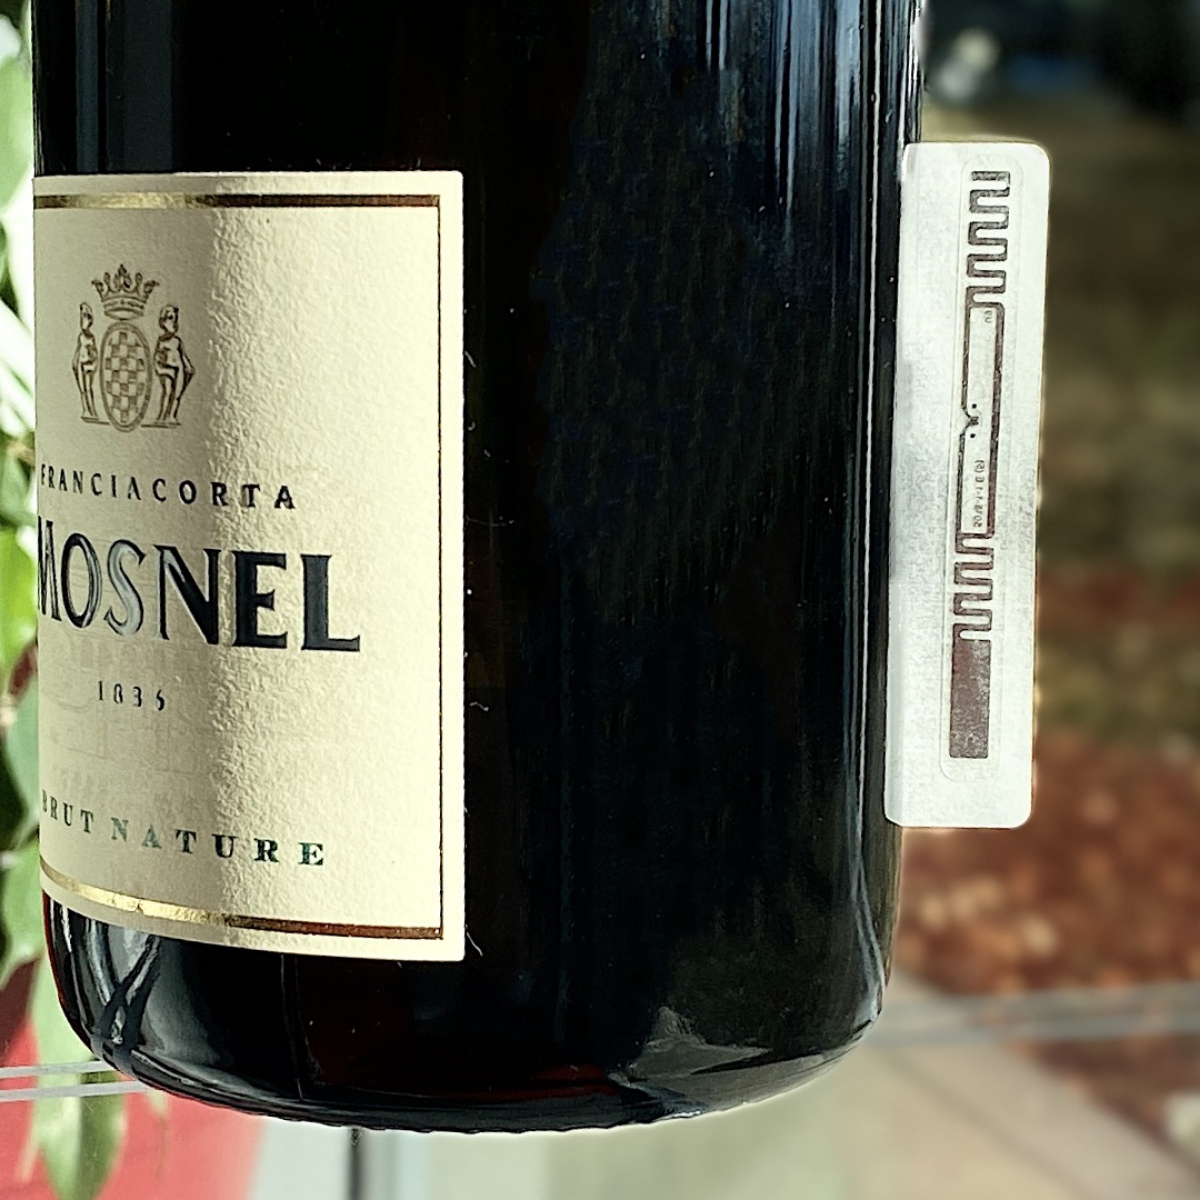 Mosnel welcomes a new era of wine authenticity and traceability